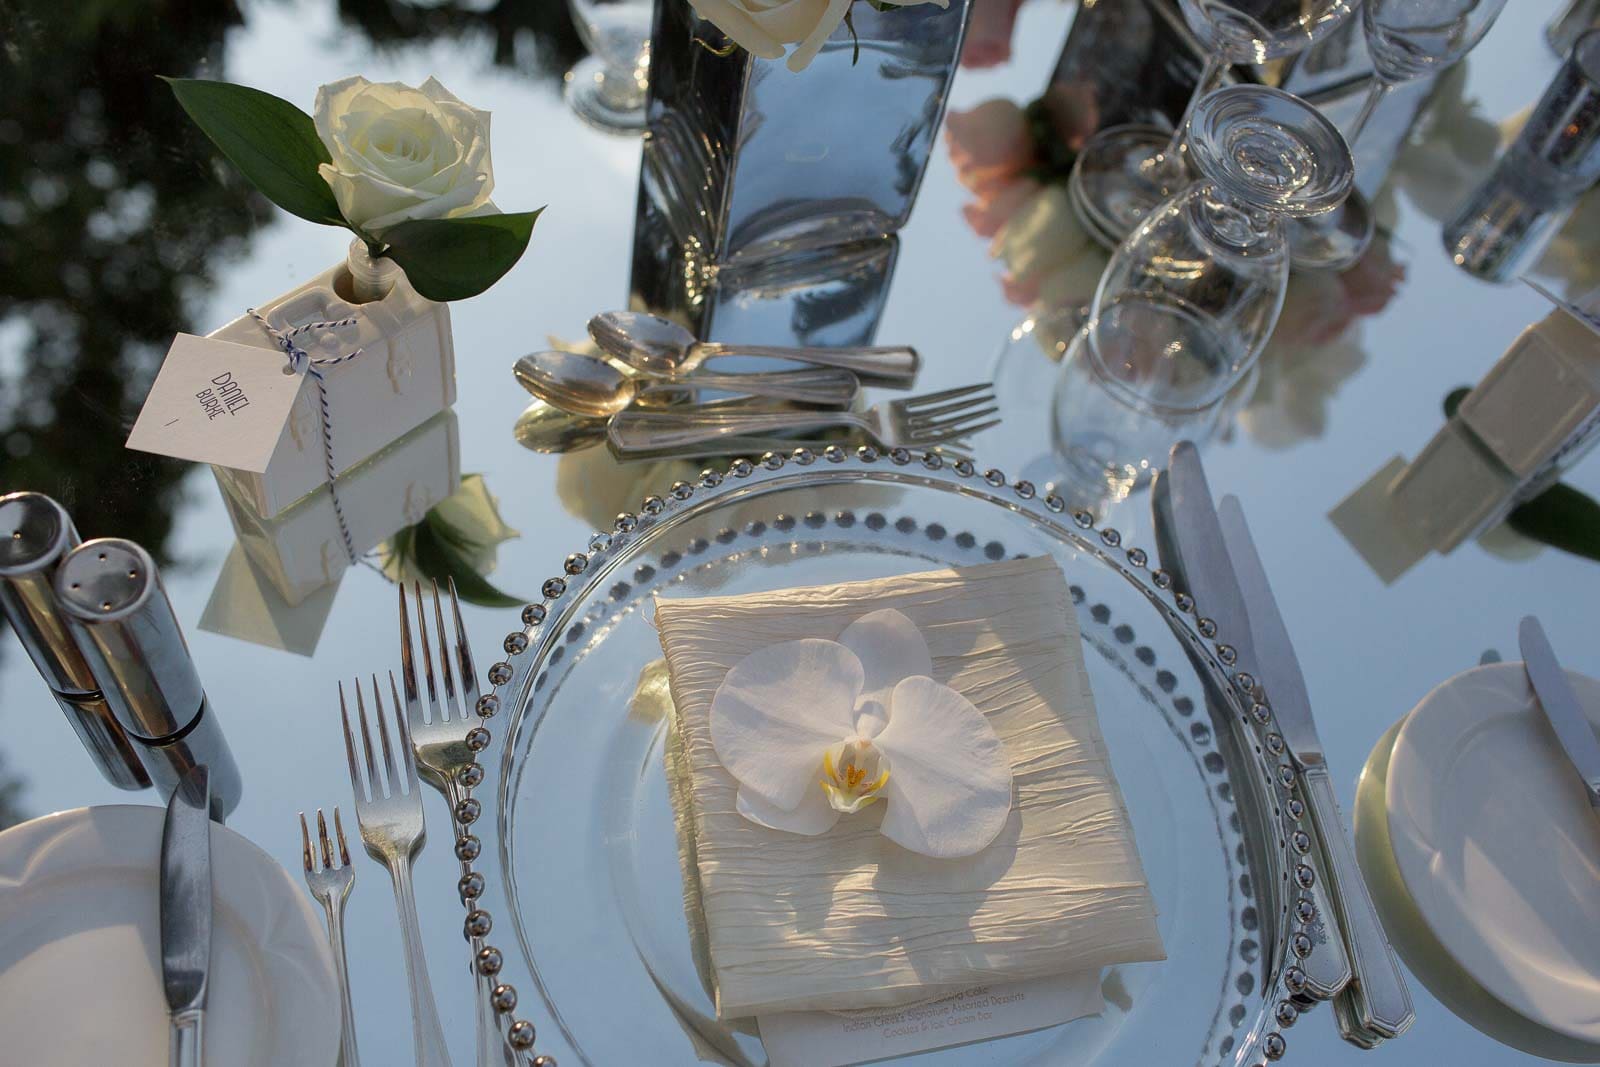 A table set with silverware and place settings.